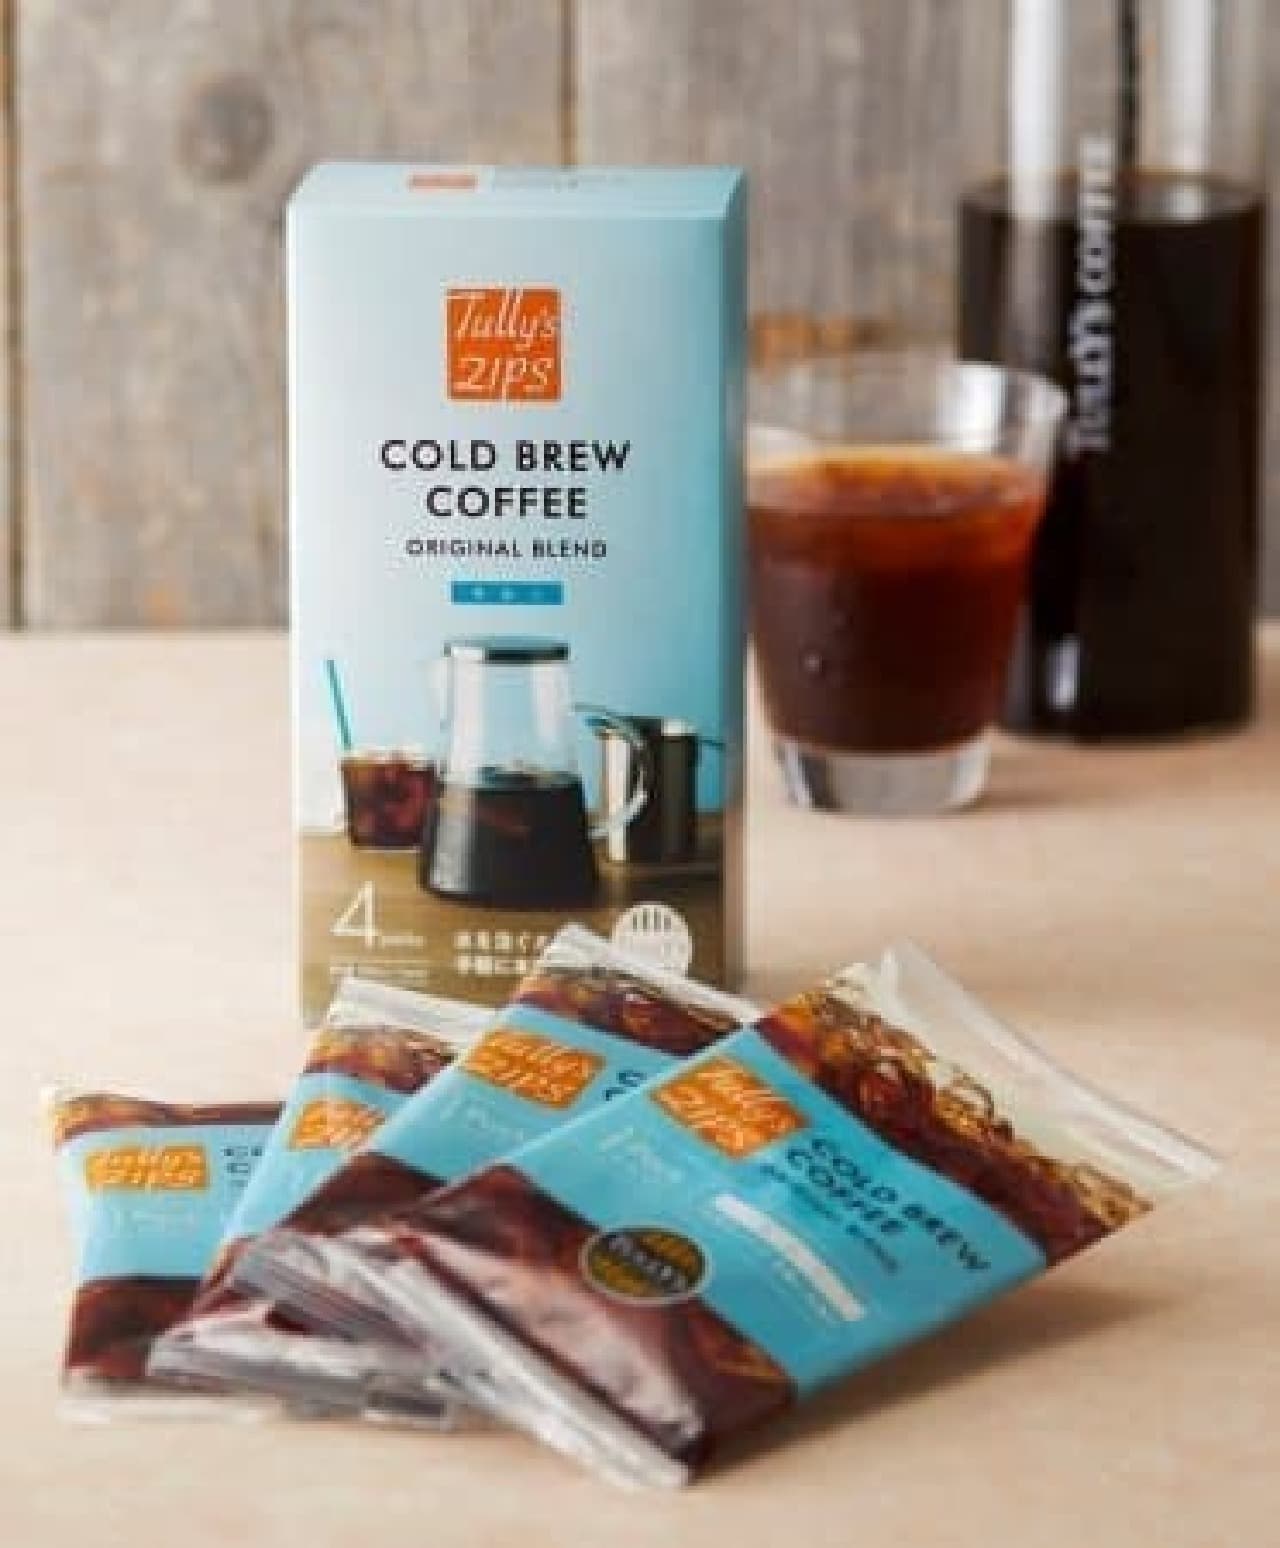 Tully's Zips Cold Brew Coffee Original Blend